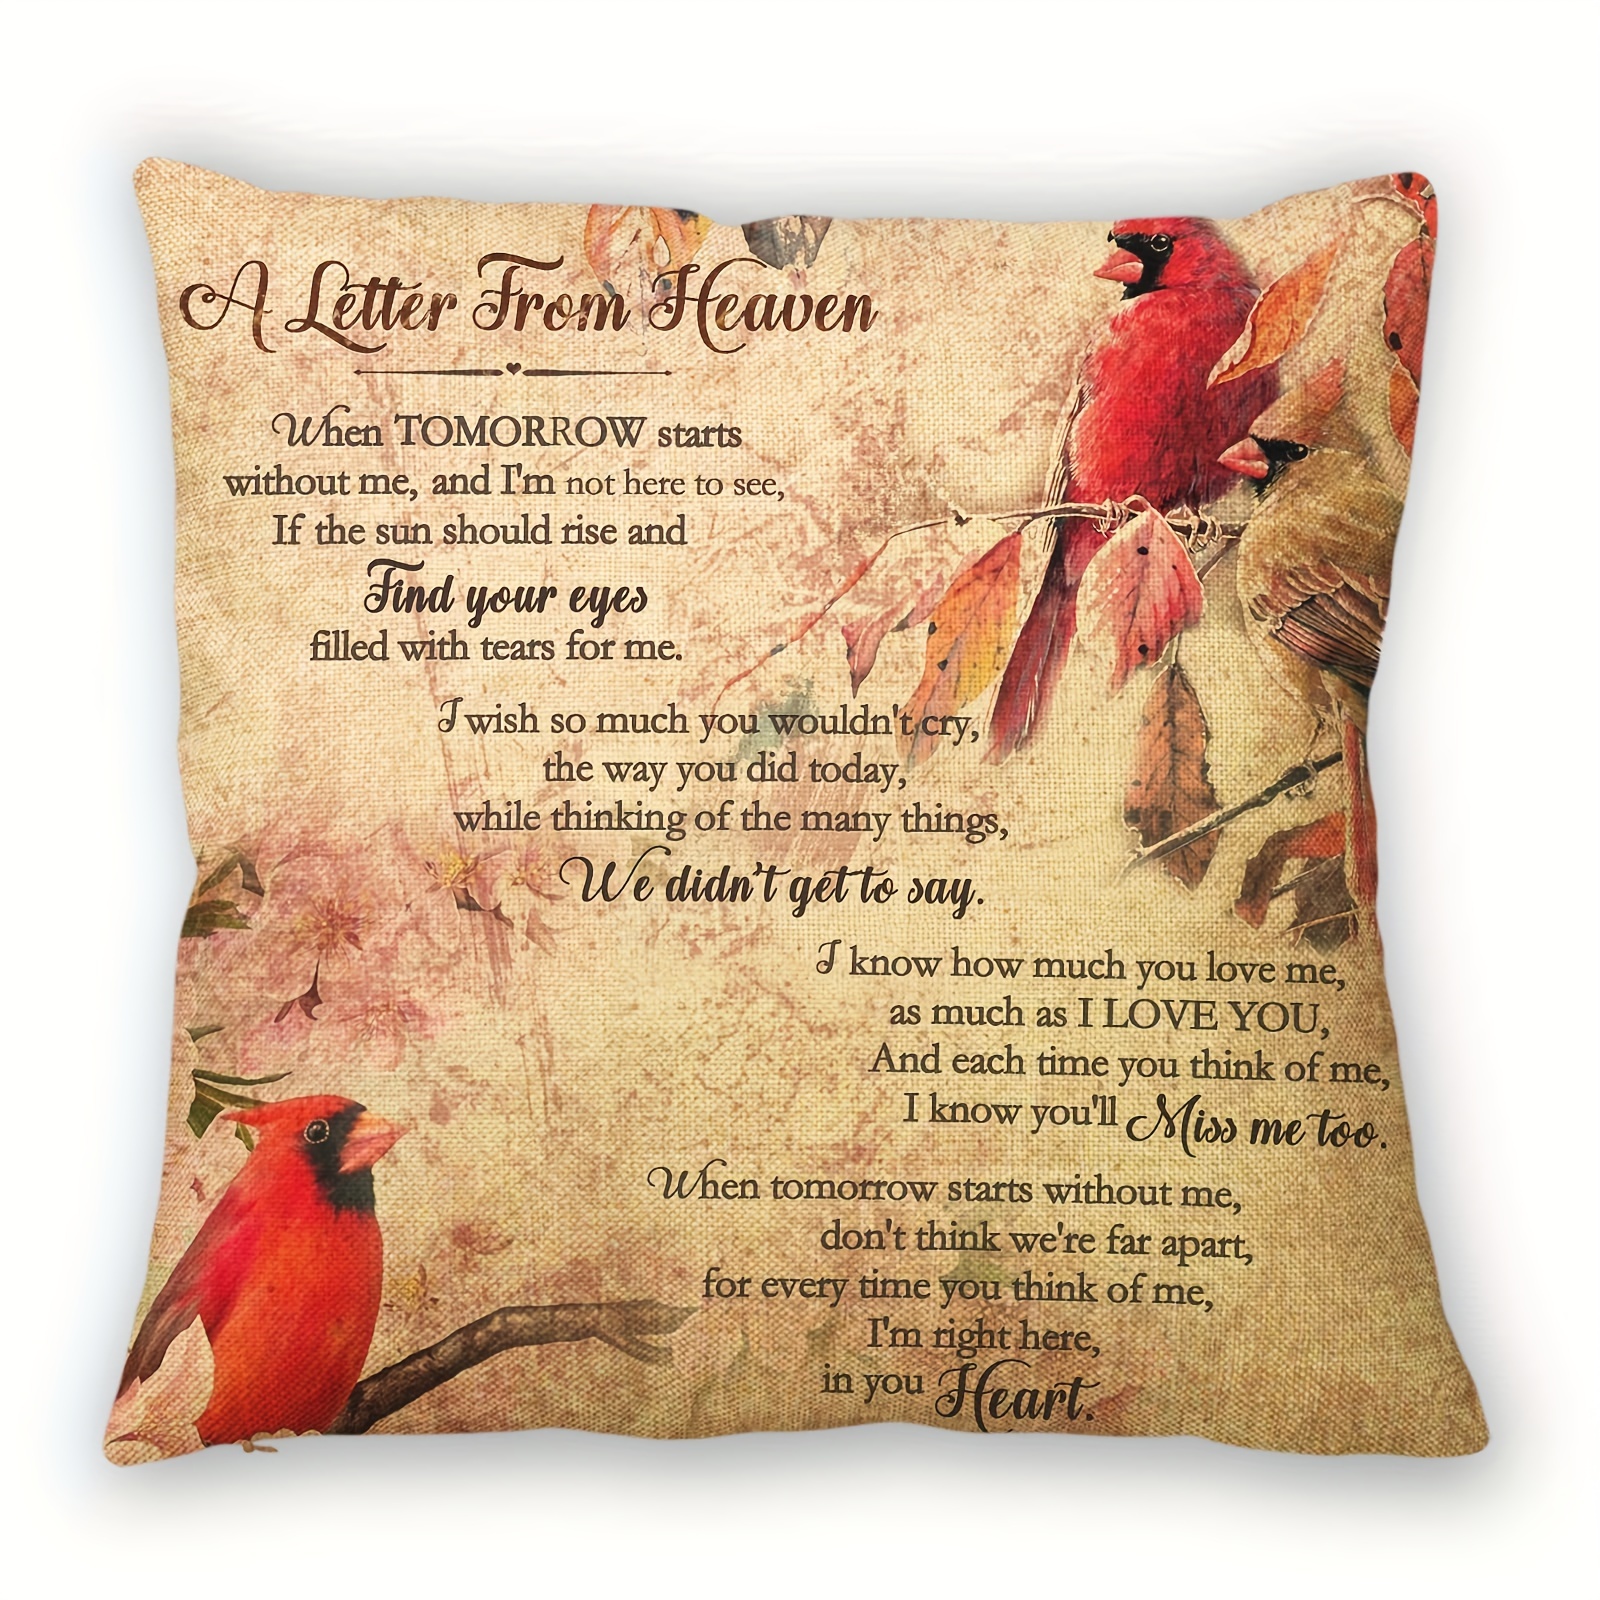 

1pc, Super Soft Short Plush Throw Pillow (18''x18''), Cardinalis A Letter From Heaven, Pillow Cover, Home Decor, Room Decor, Bedroom Decor (cushion Is Not Included)